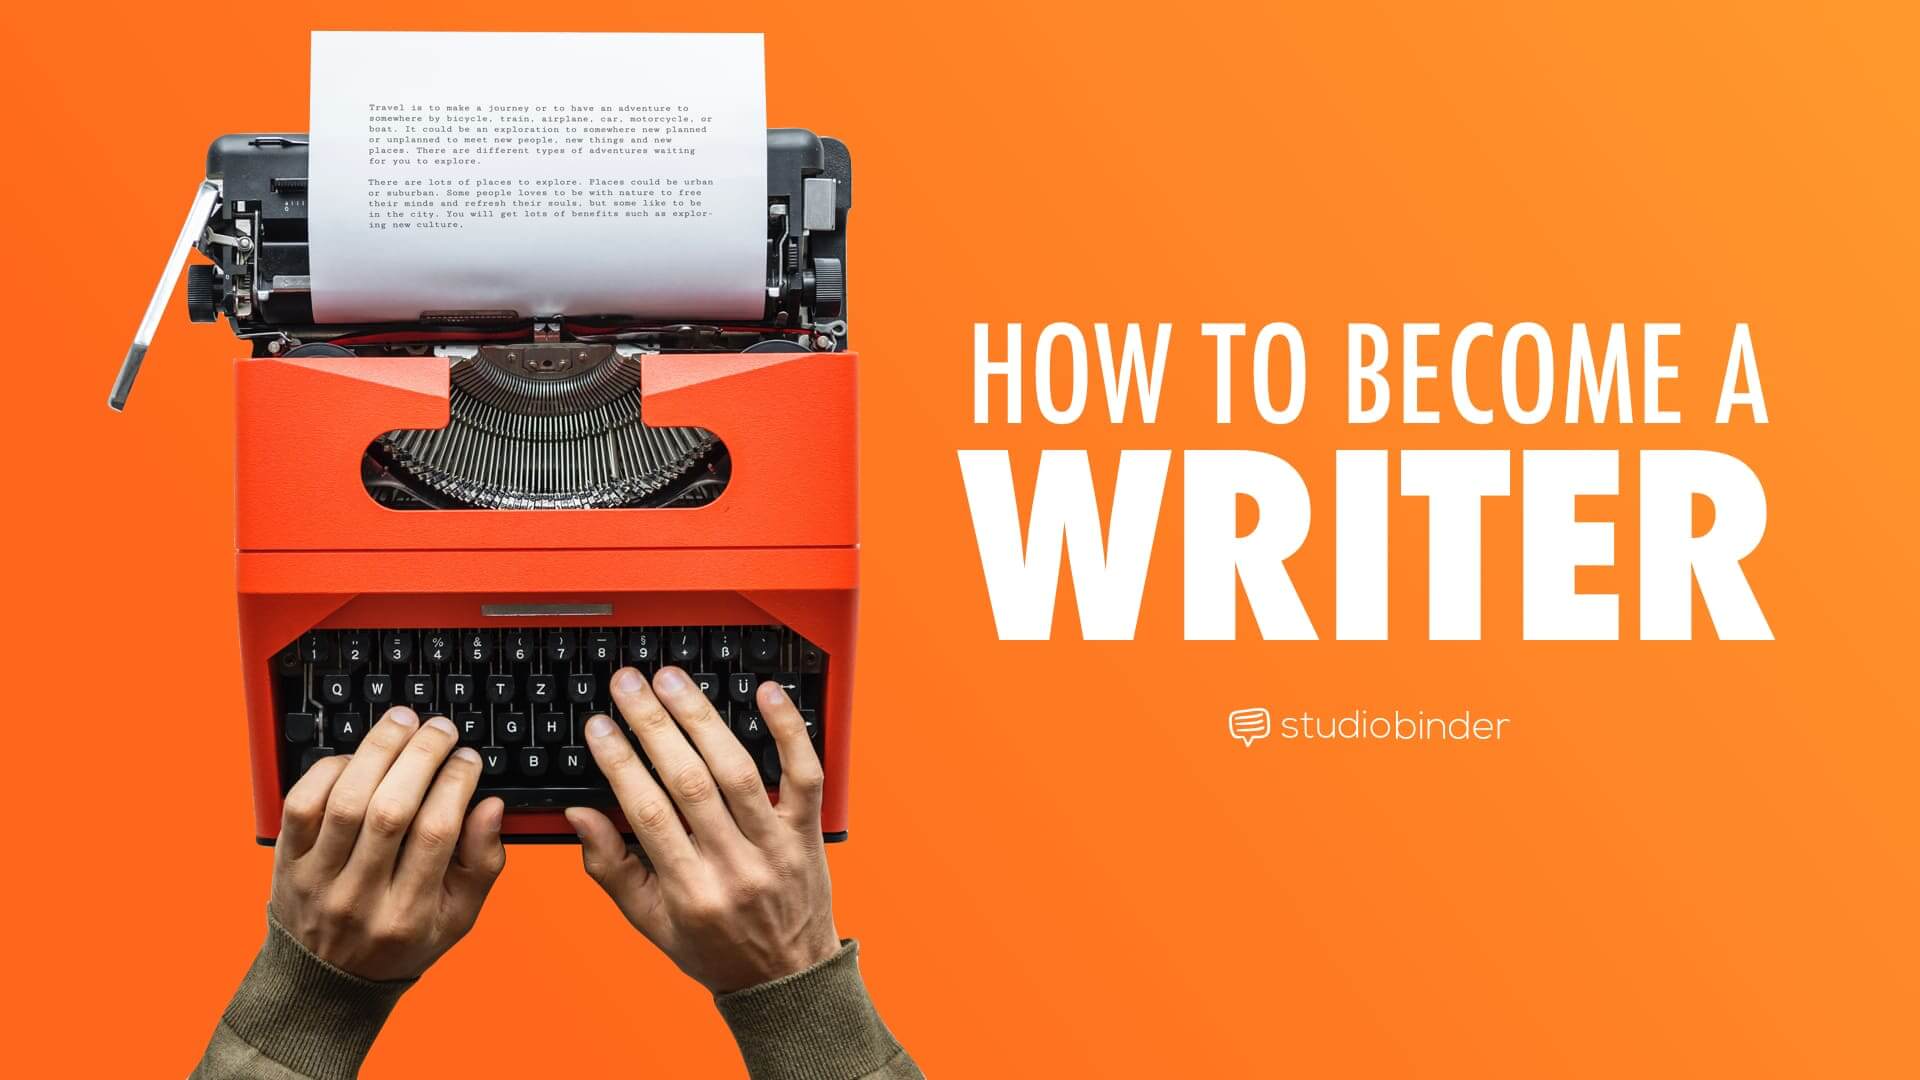 how many years of education to become a writer